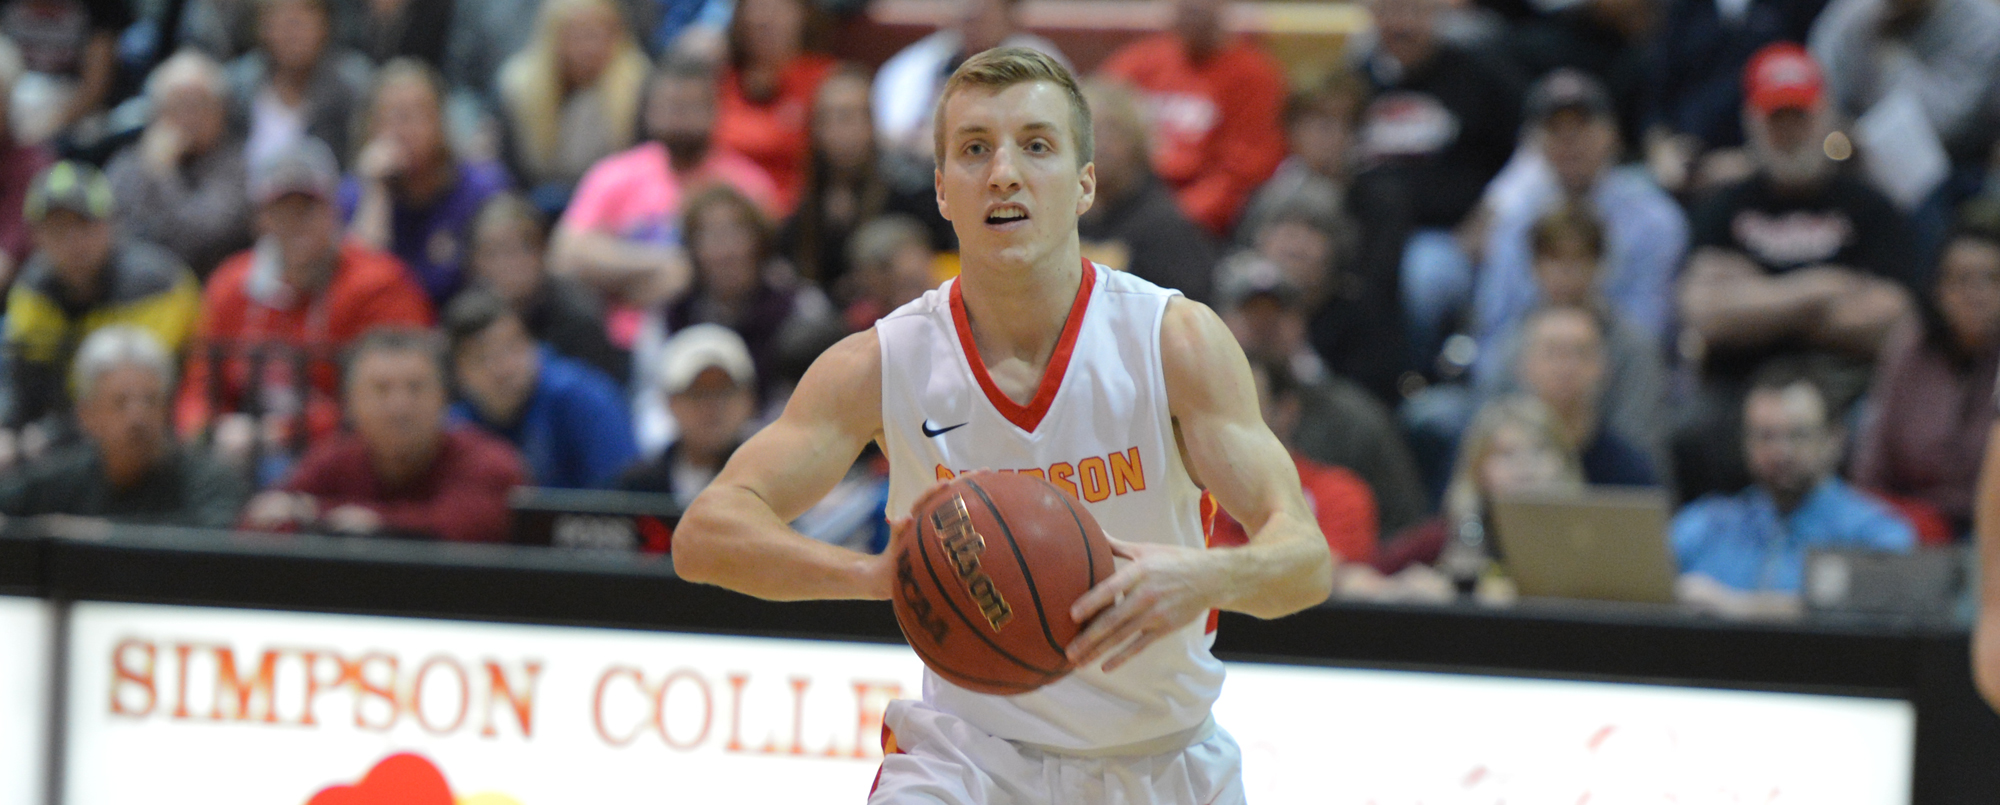 Brook Thompson and the Storm travel to Coe on Saturday, Jan. 21.